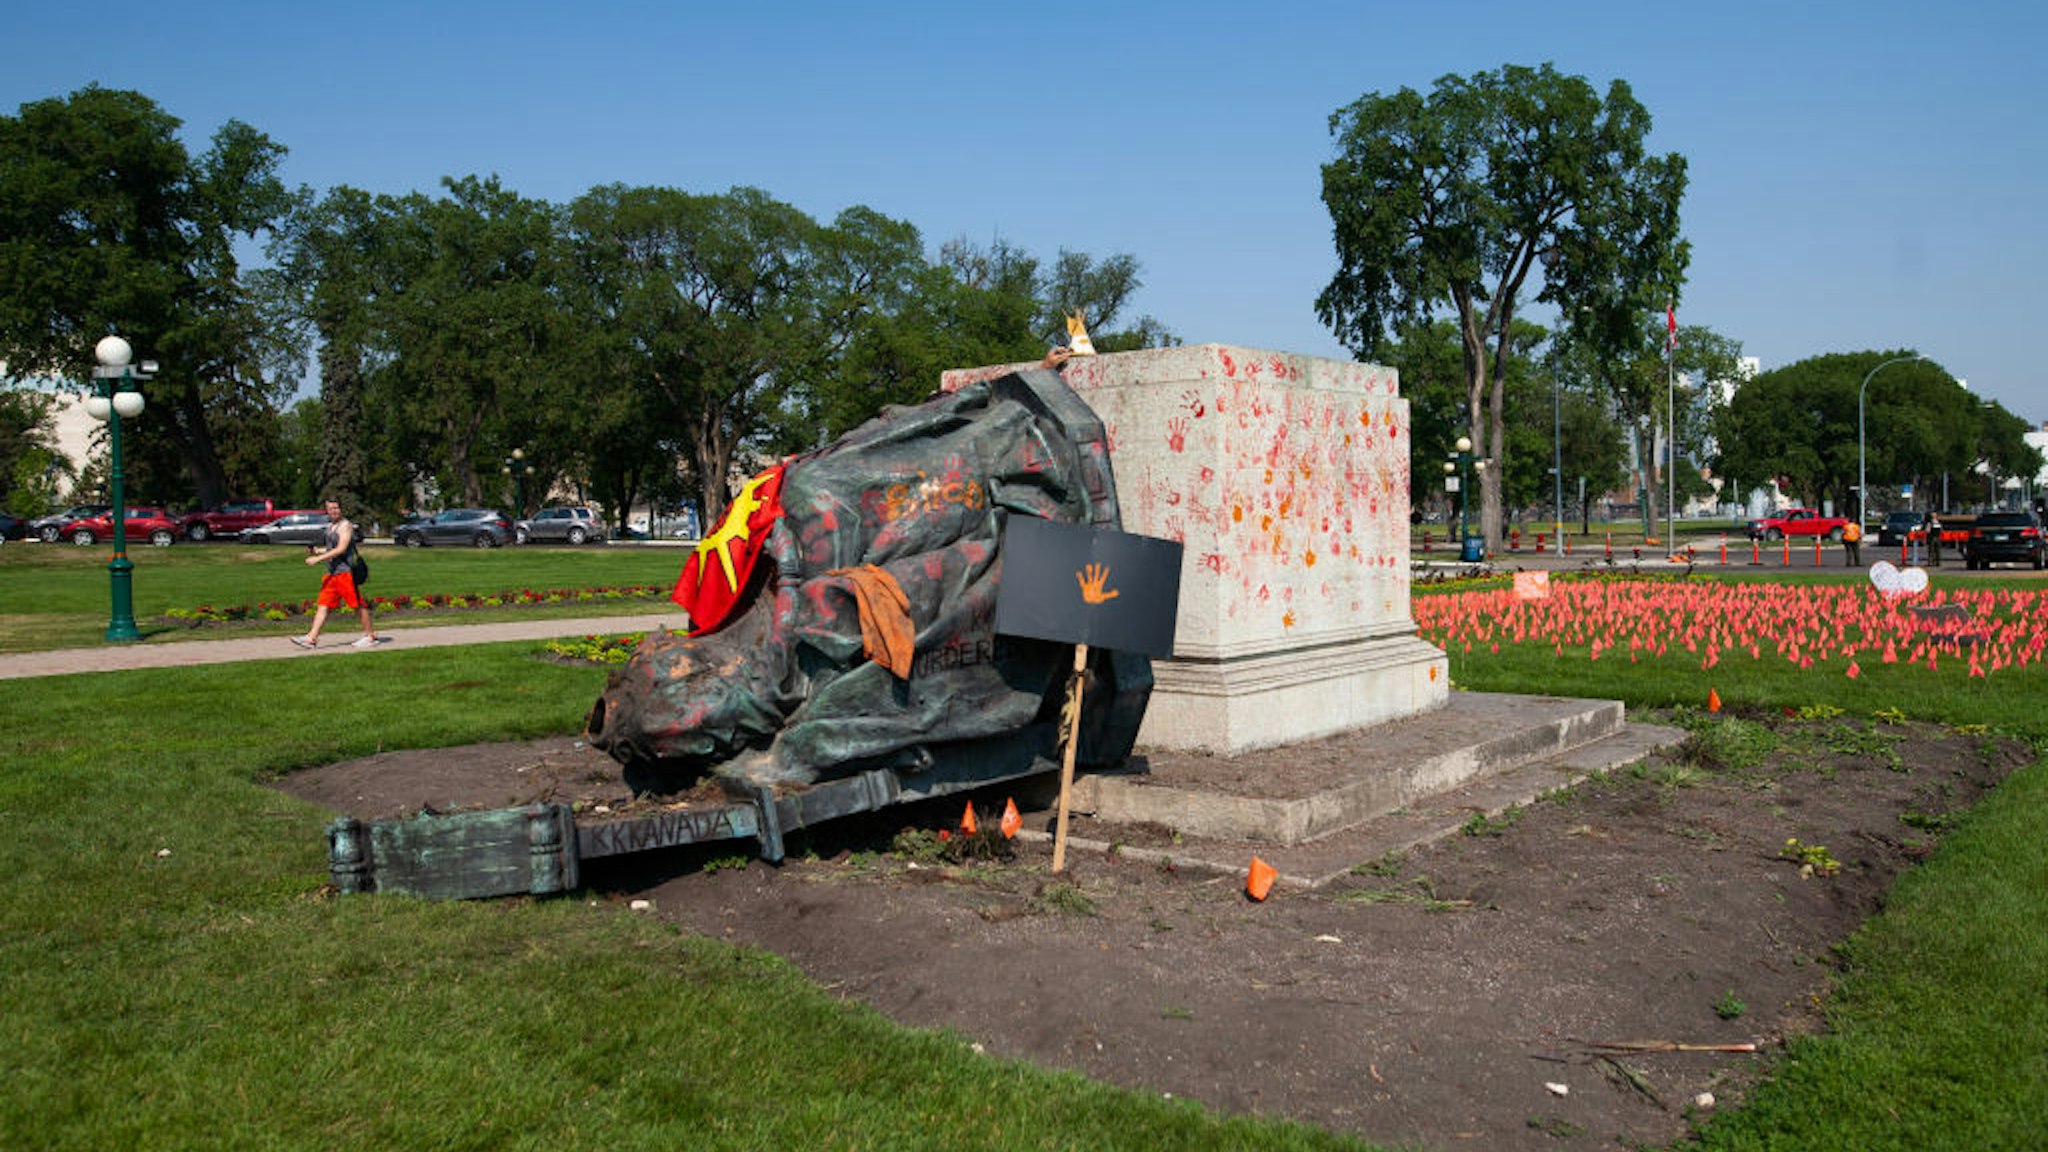 WINNIPEG, CANADA - JULY 02: A toppled statue of Queen Victoria on the grounds of the Manitoba Legislature on July 2, 2021 in Winnipeg, Manitoba, Canada. The statue was pulled down by indigenous protestors following a march to honour survivors and victims of Canadaâs residential school system.